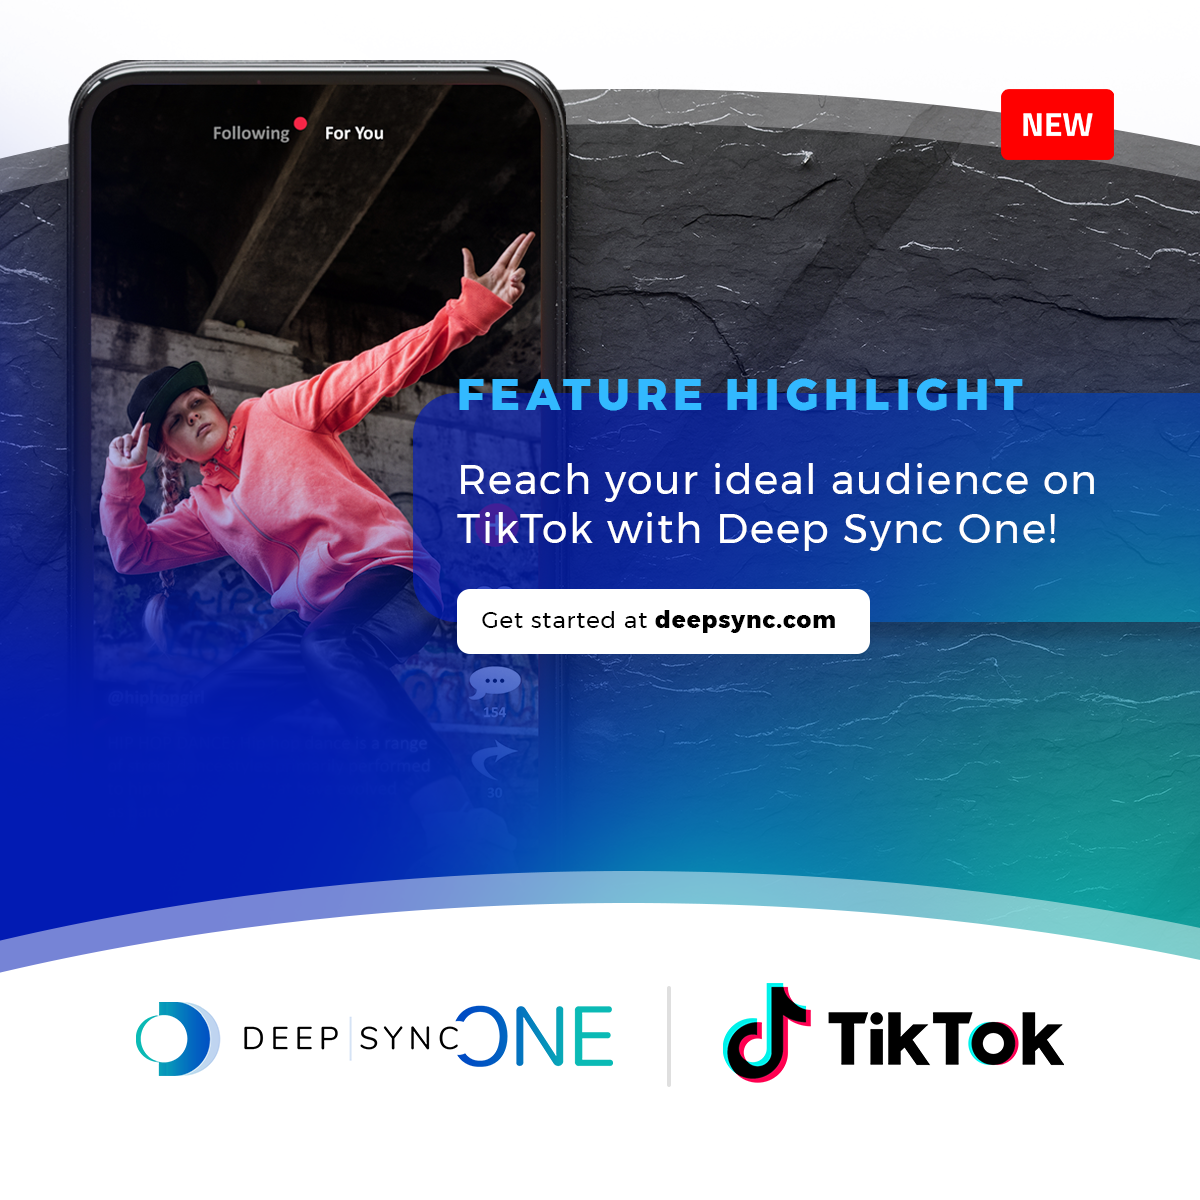 Deep Sync One data is now available for use on TikTok